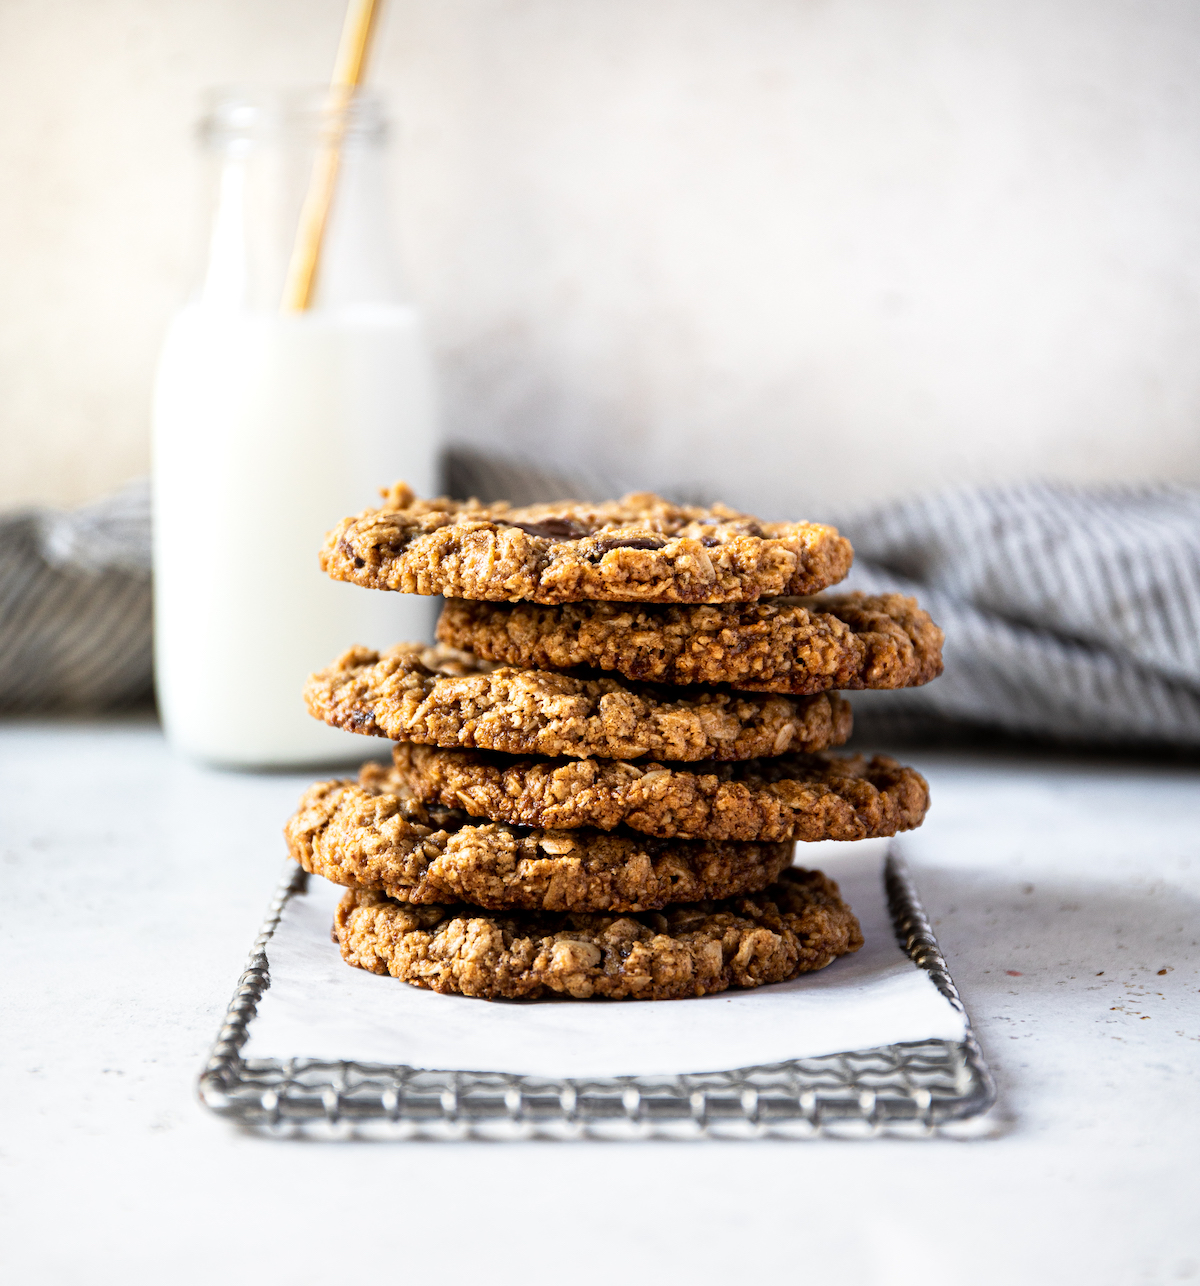 A stack of gluten free cookies.